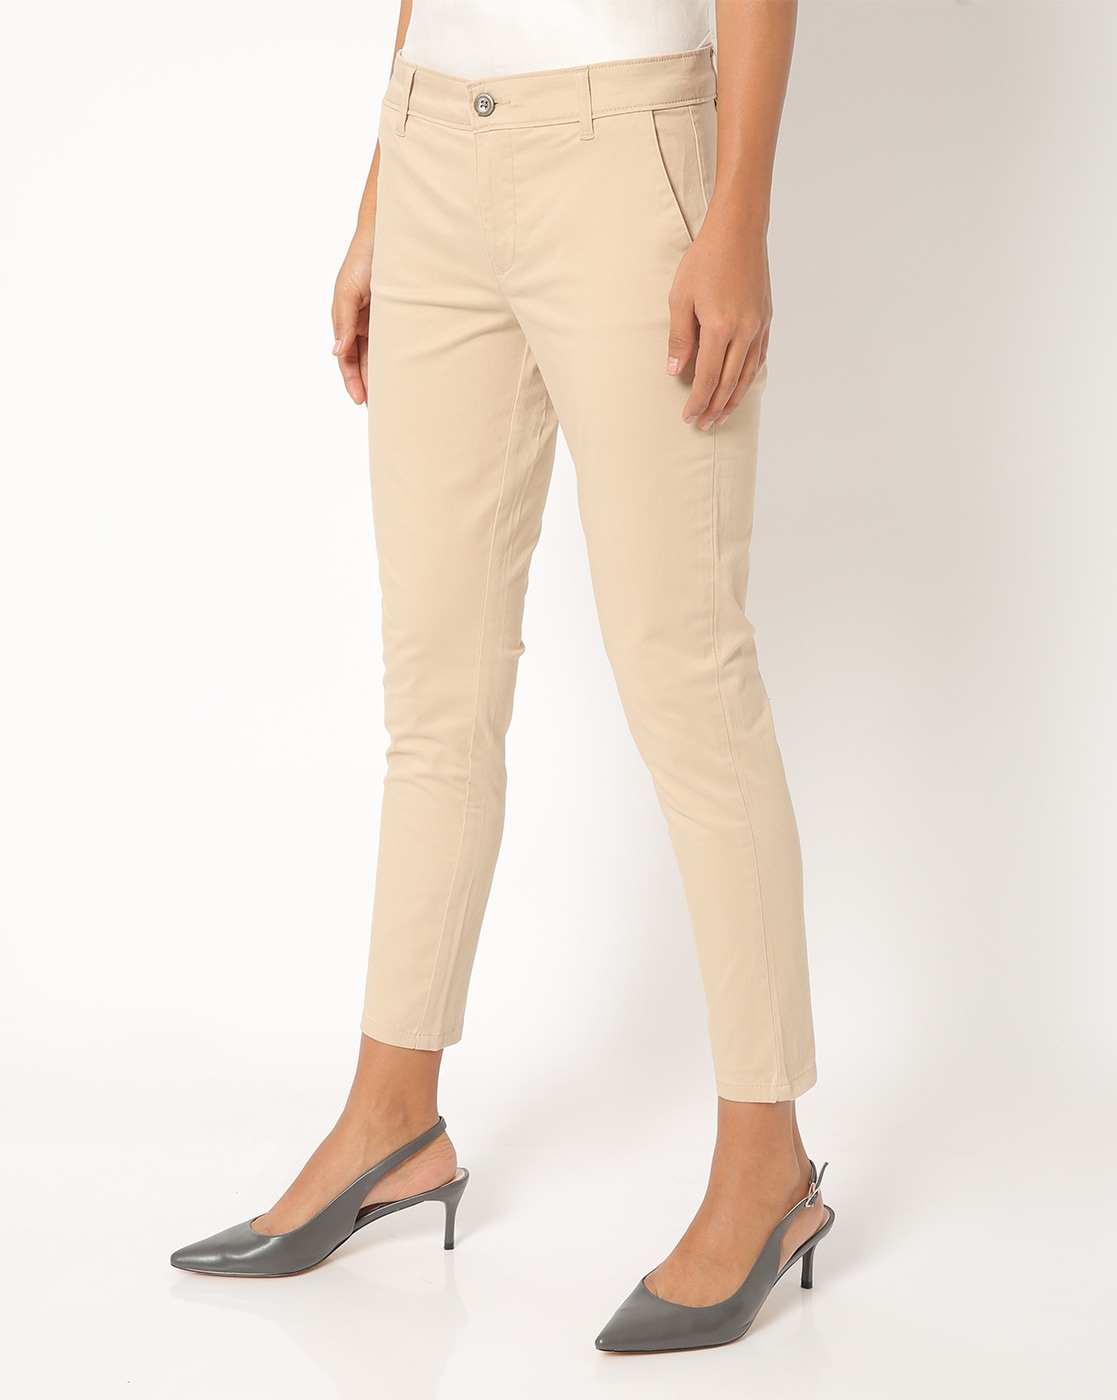 Ultimate Chinos, Mid-Rise Straight-Leg | Pants & Jeans at L.L.Bean